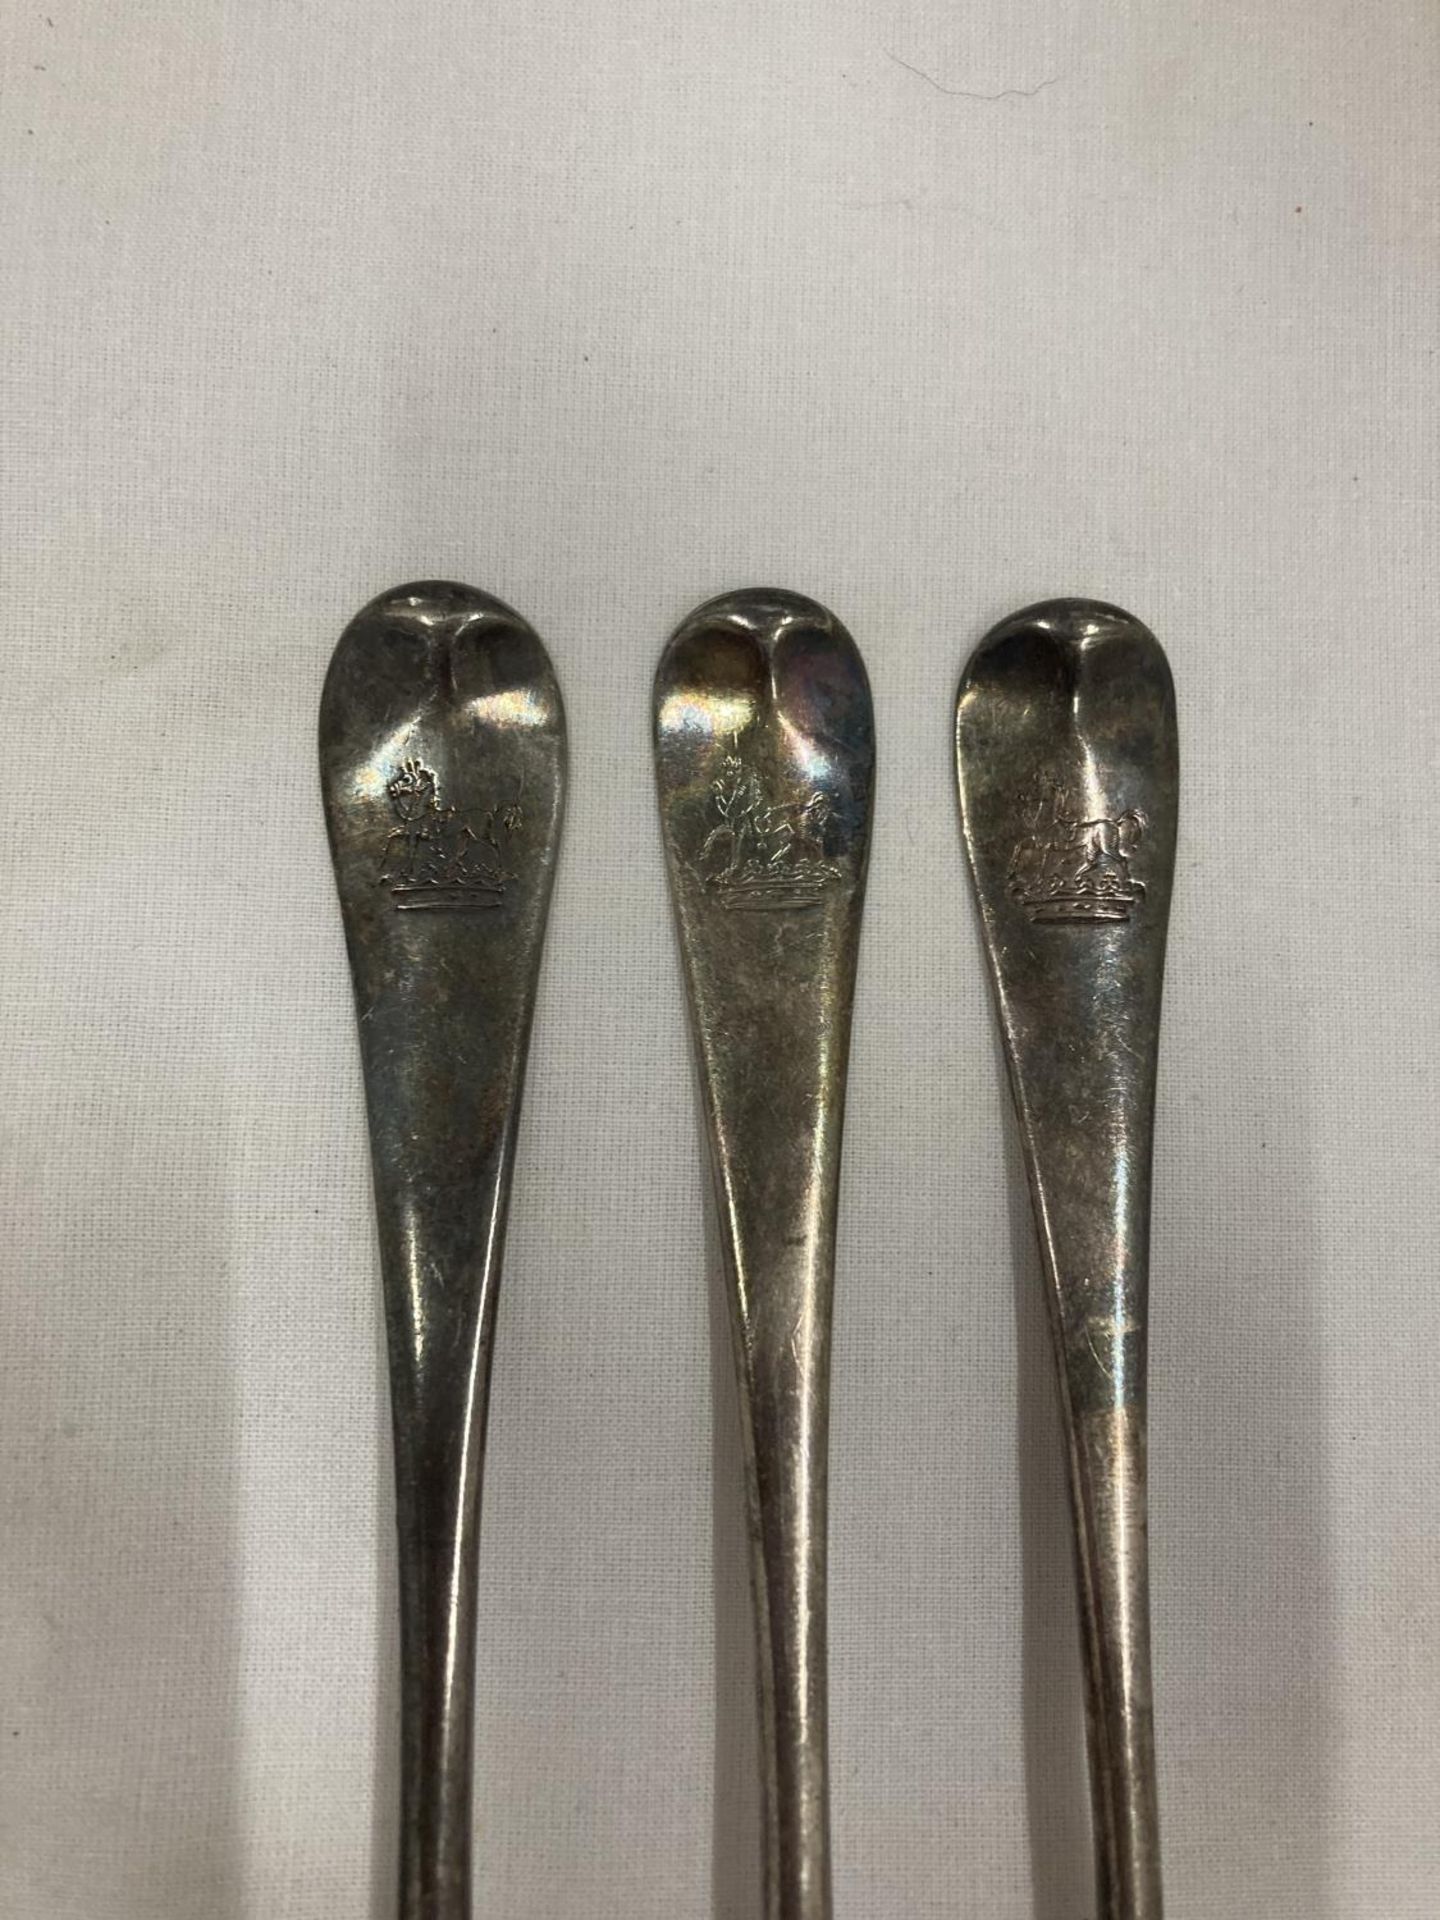 SIX HALLMARKED SILVER FORKS GROSS WEIGHT 133.5 GRAMS - Image 3 of 4